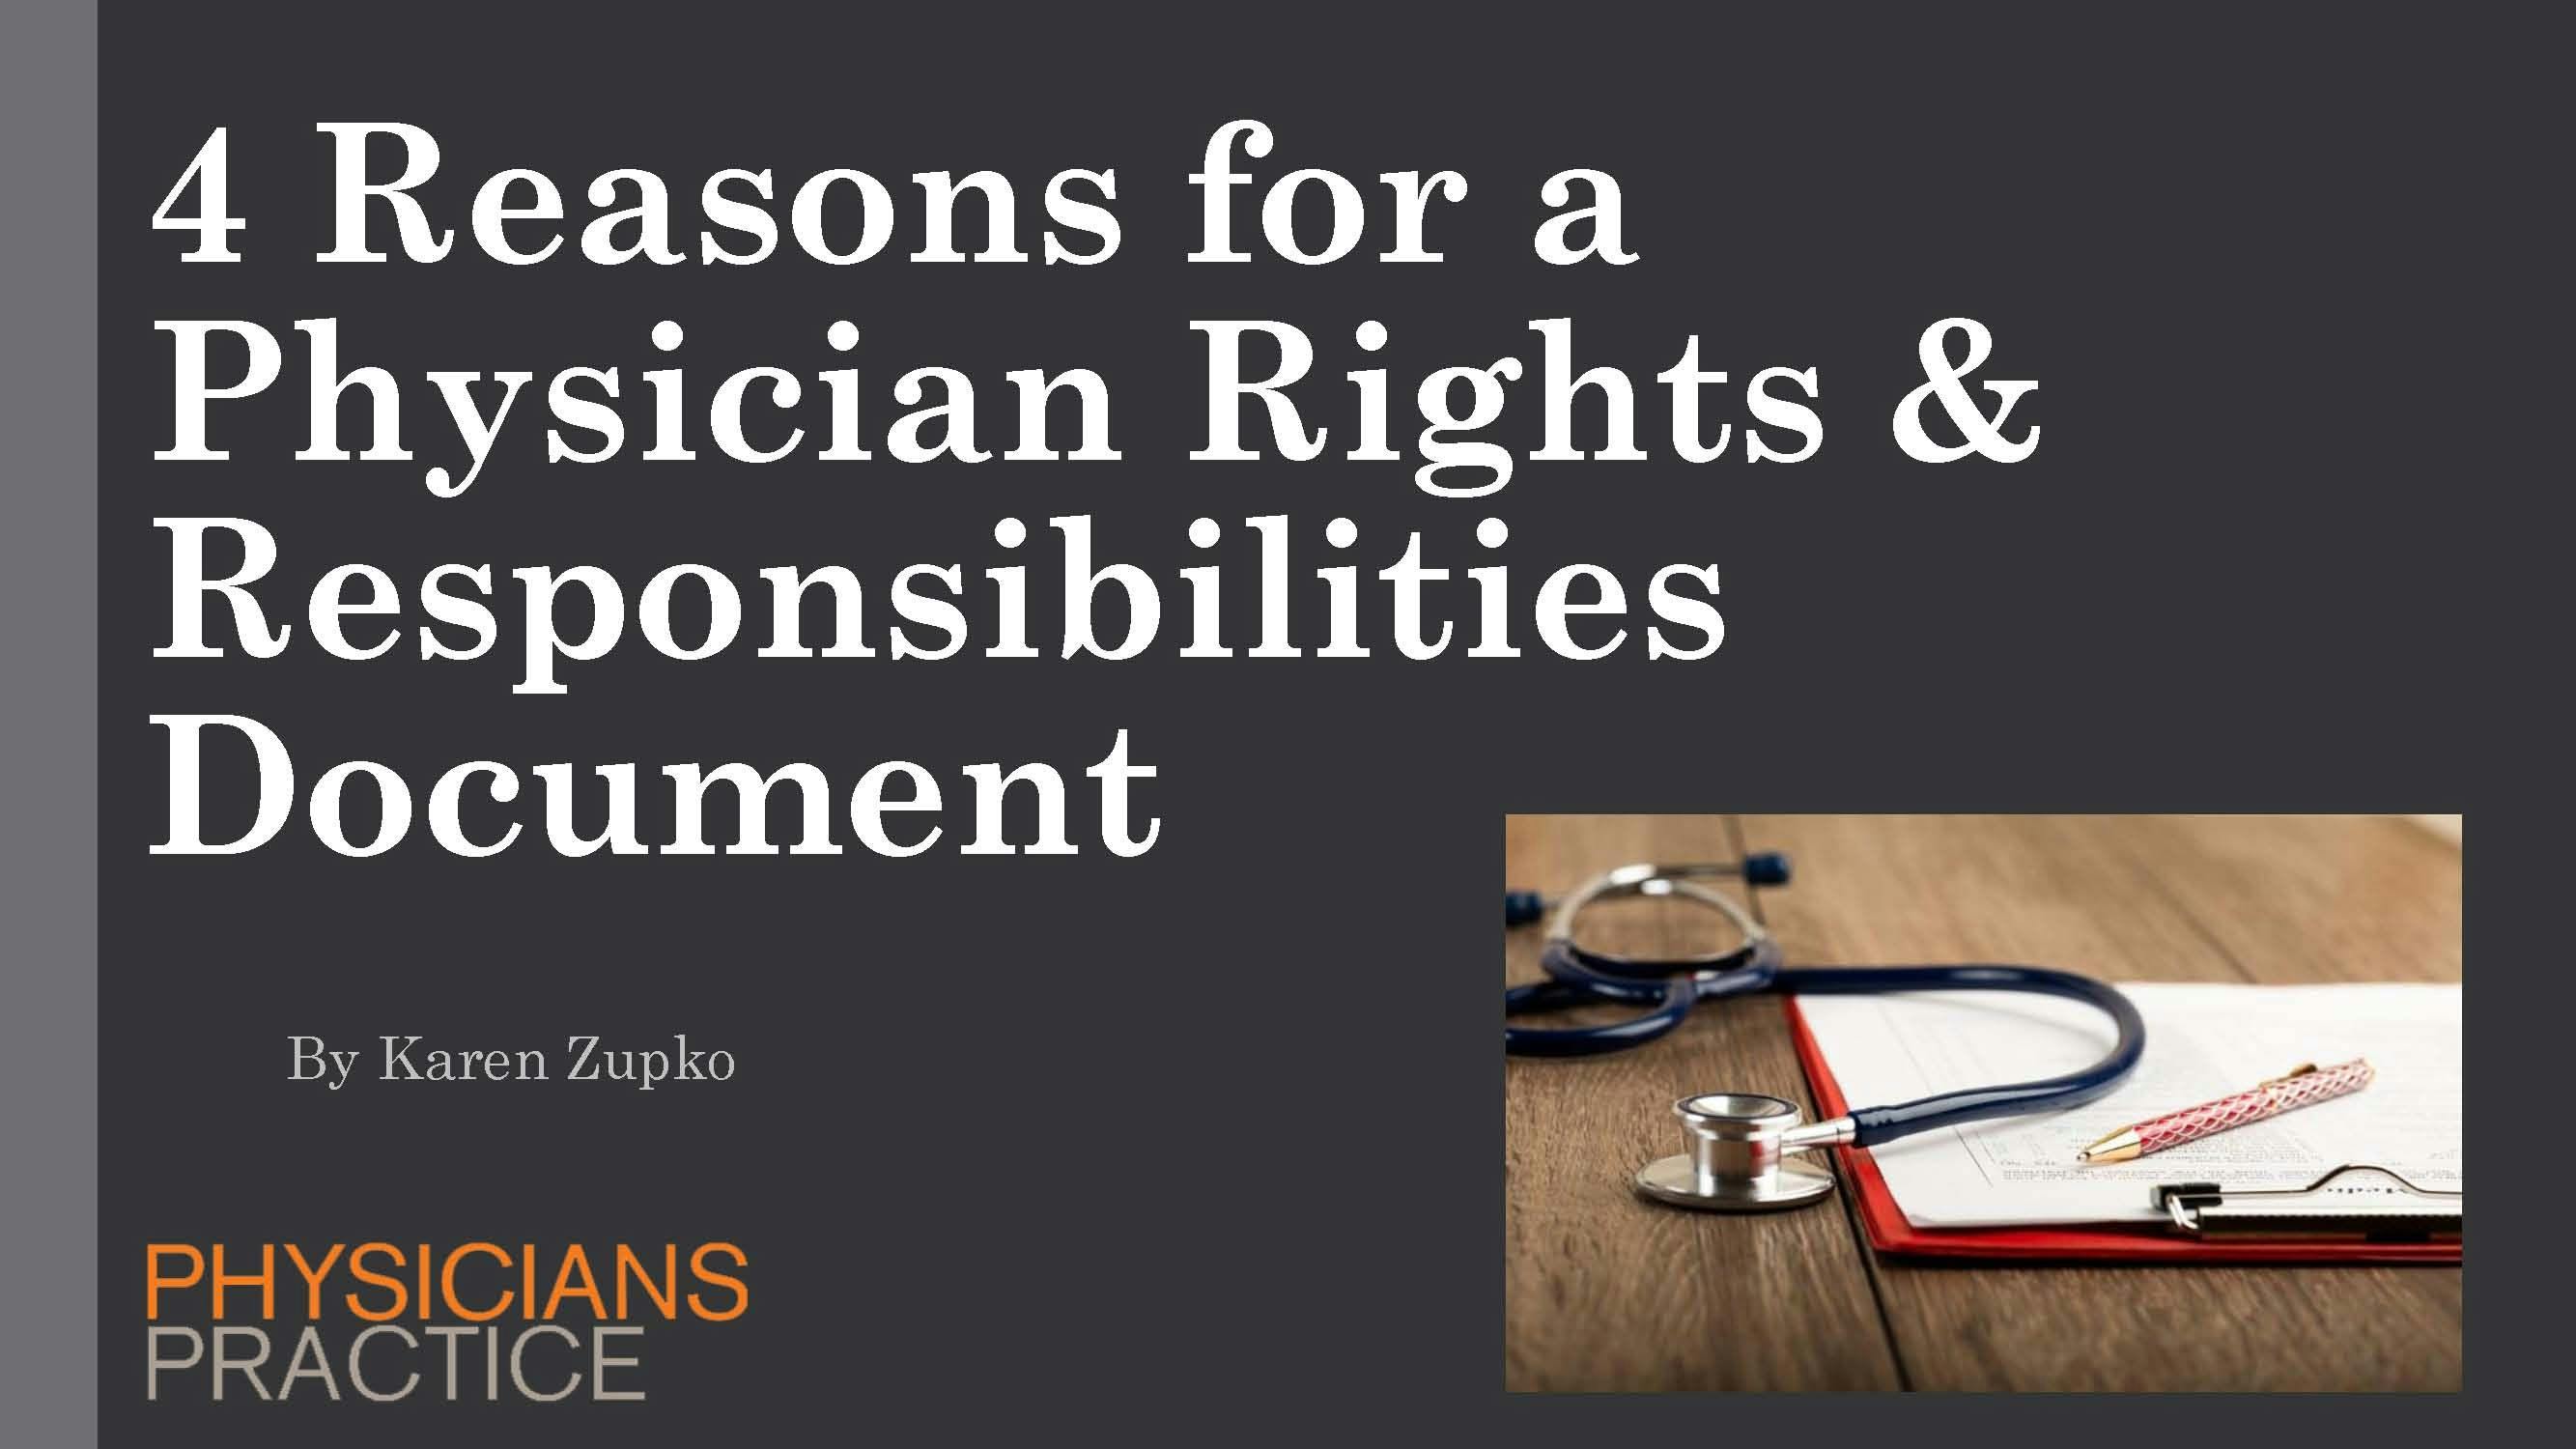 4 Reasons for a Physician Rights & Responsibilities Document